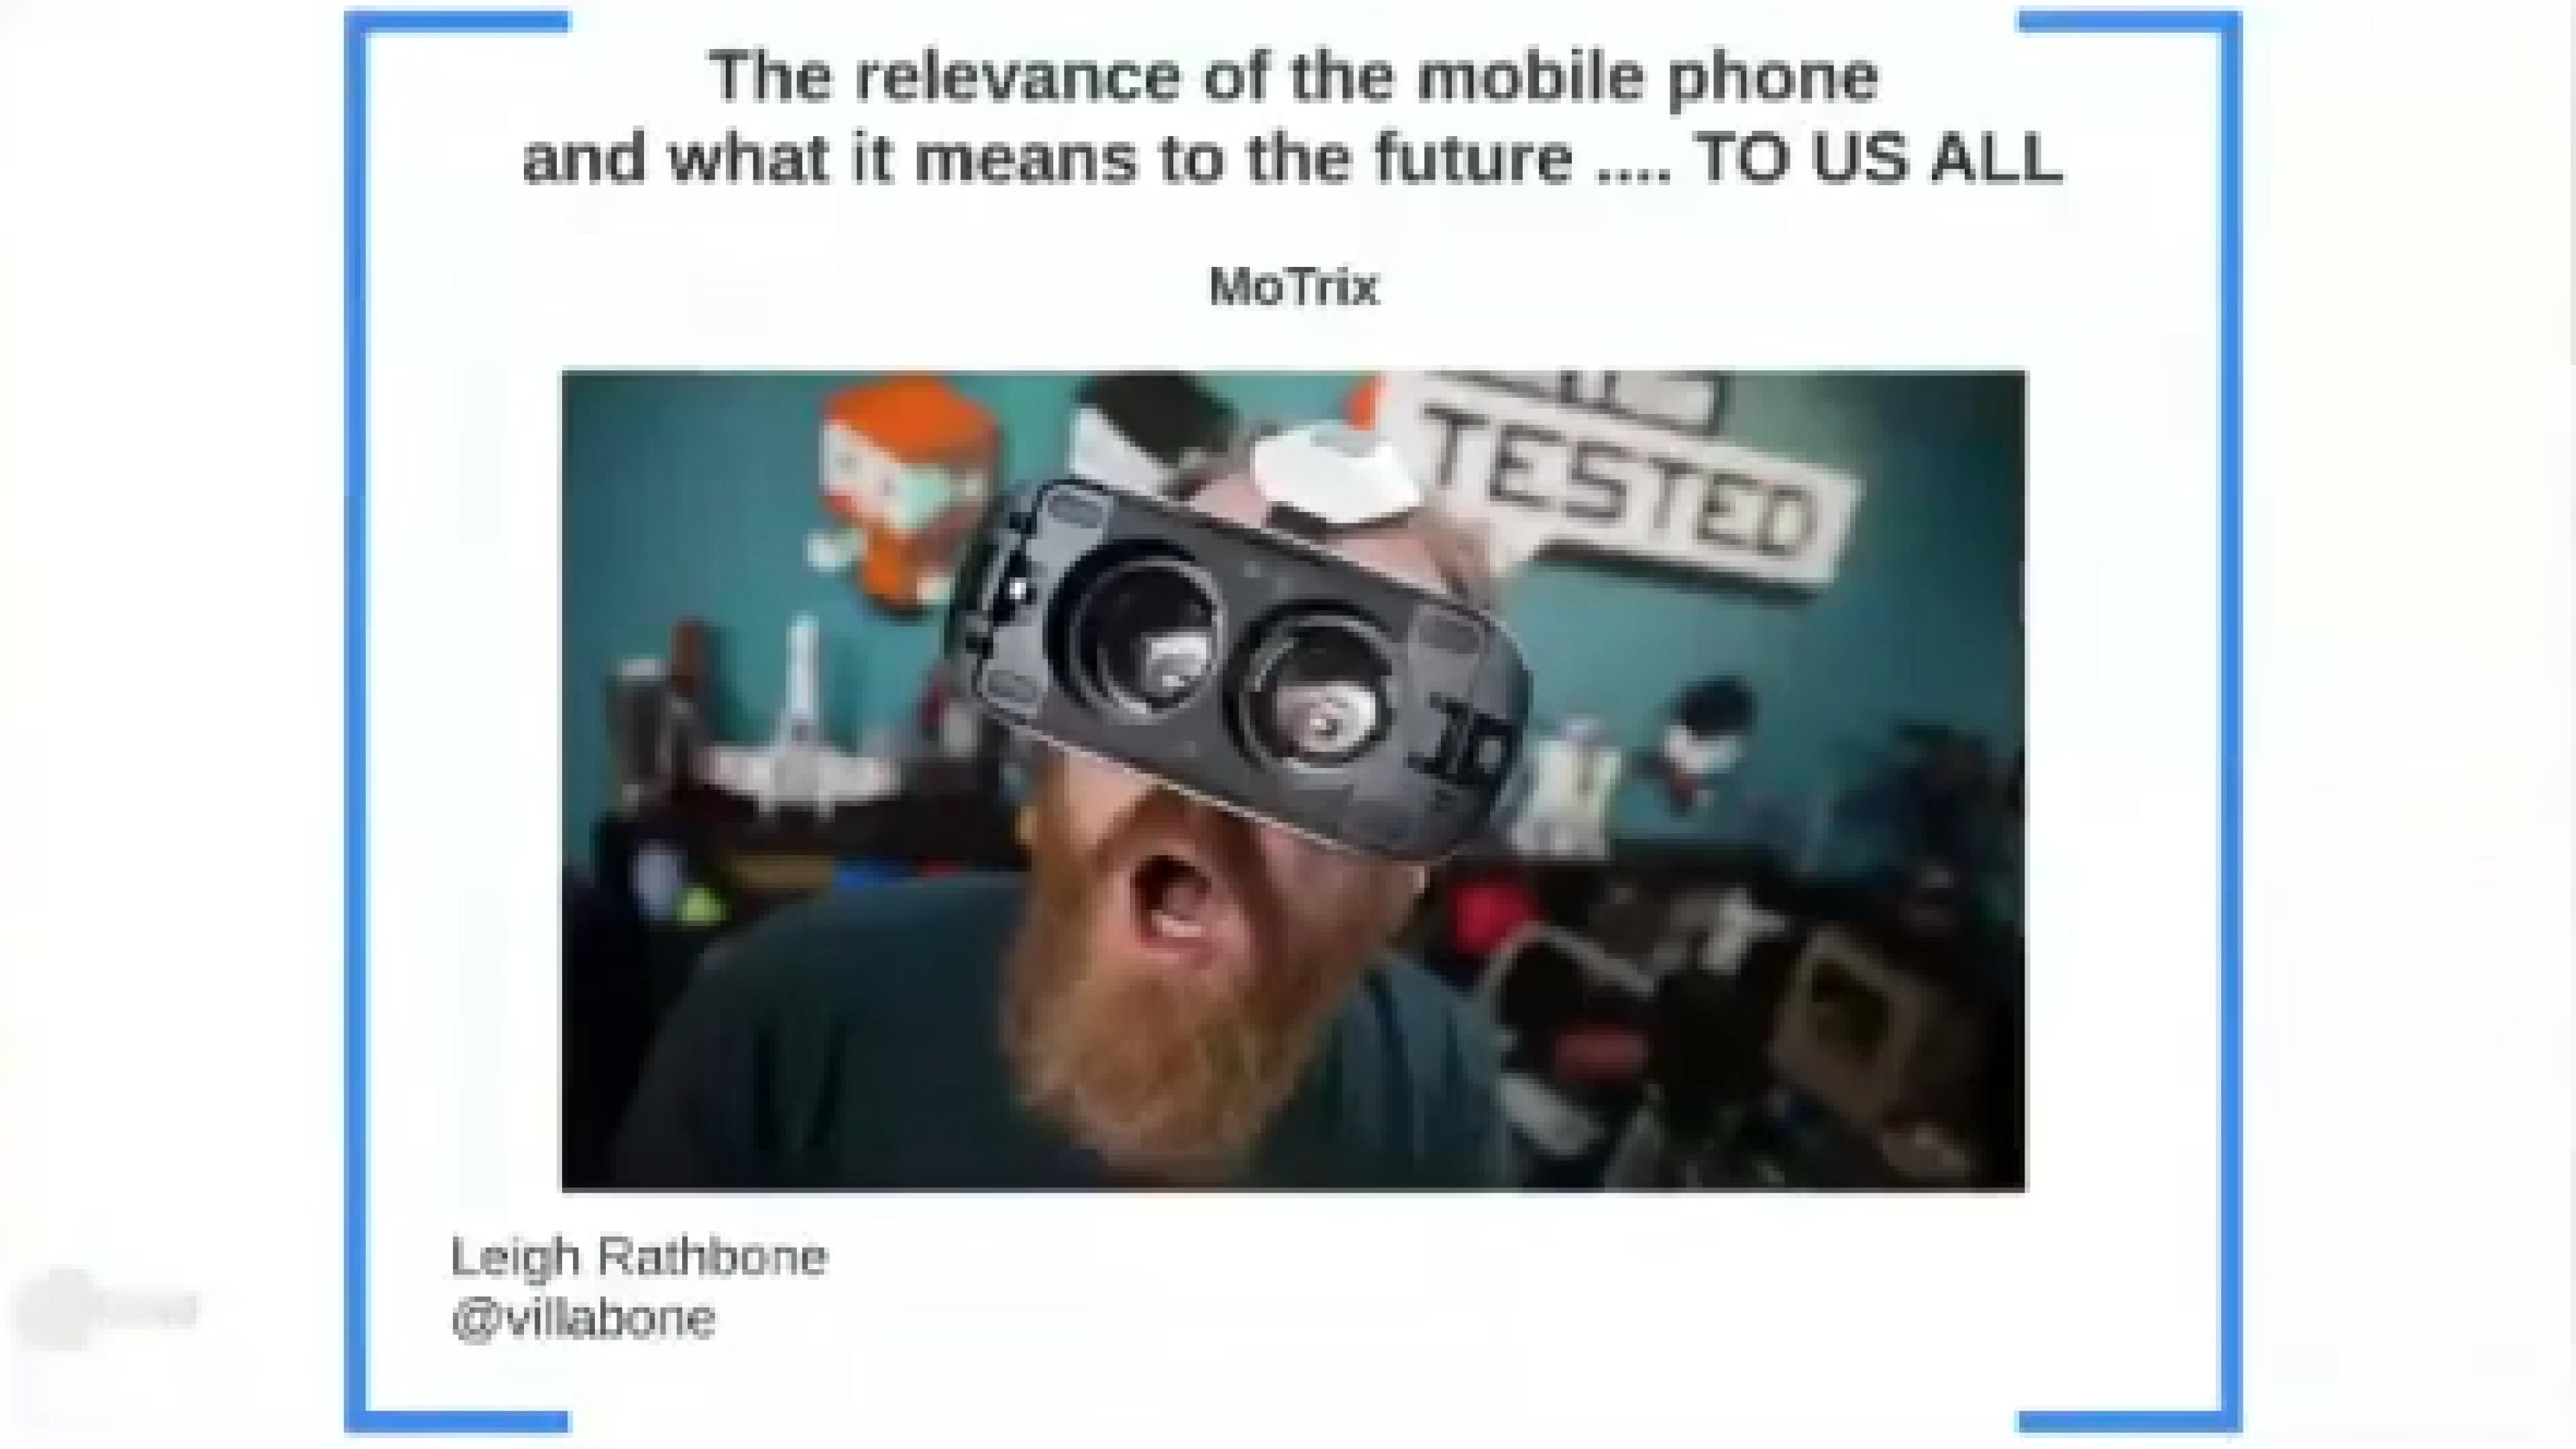 The MoTrix Reloaded - The future tech, and what it means for testing with Leigh Rathbone